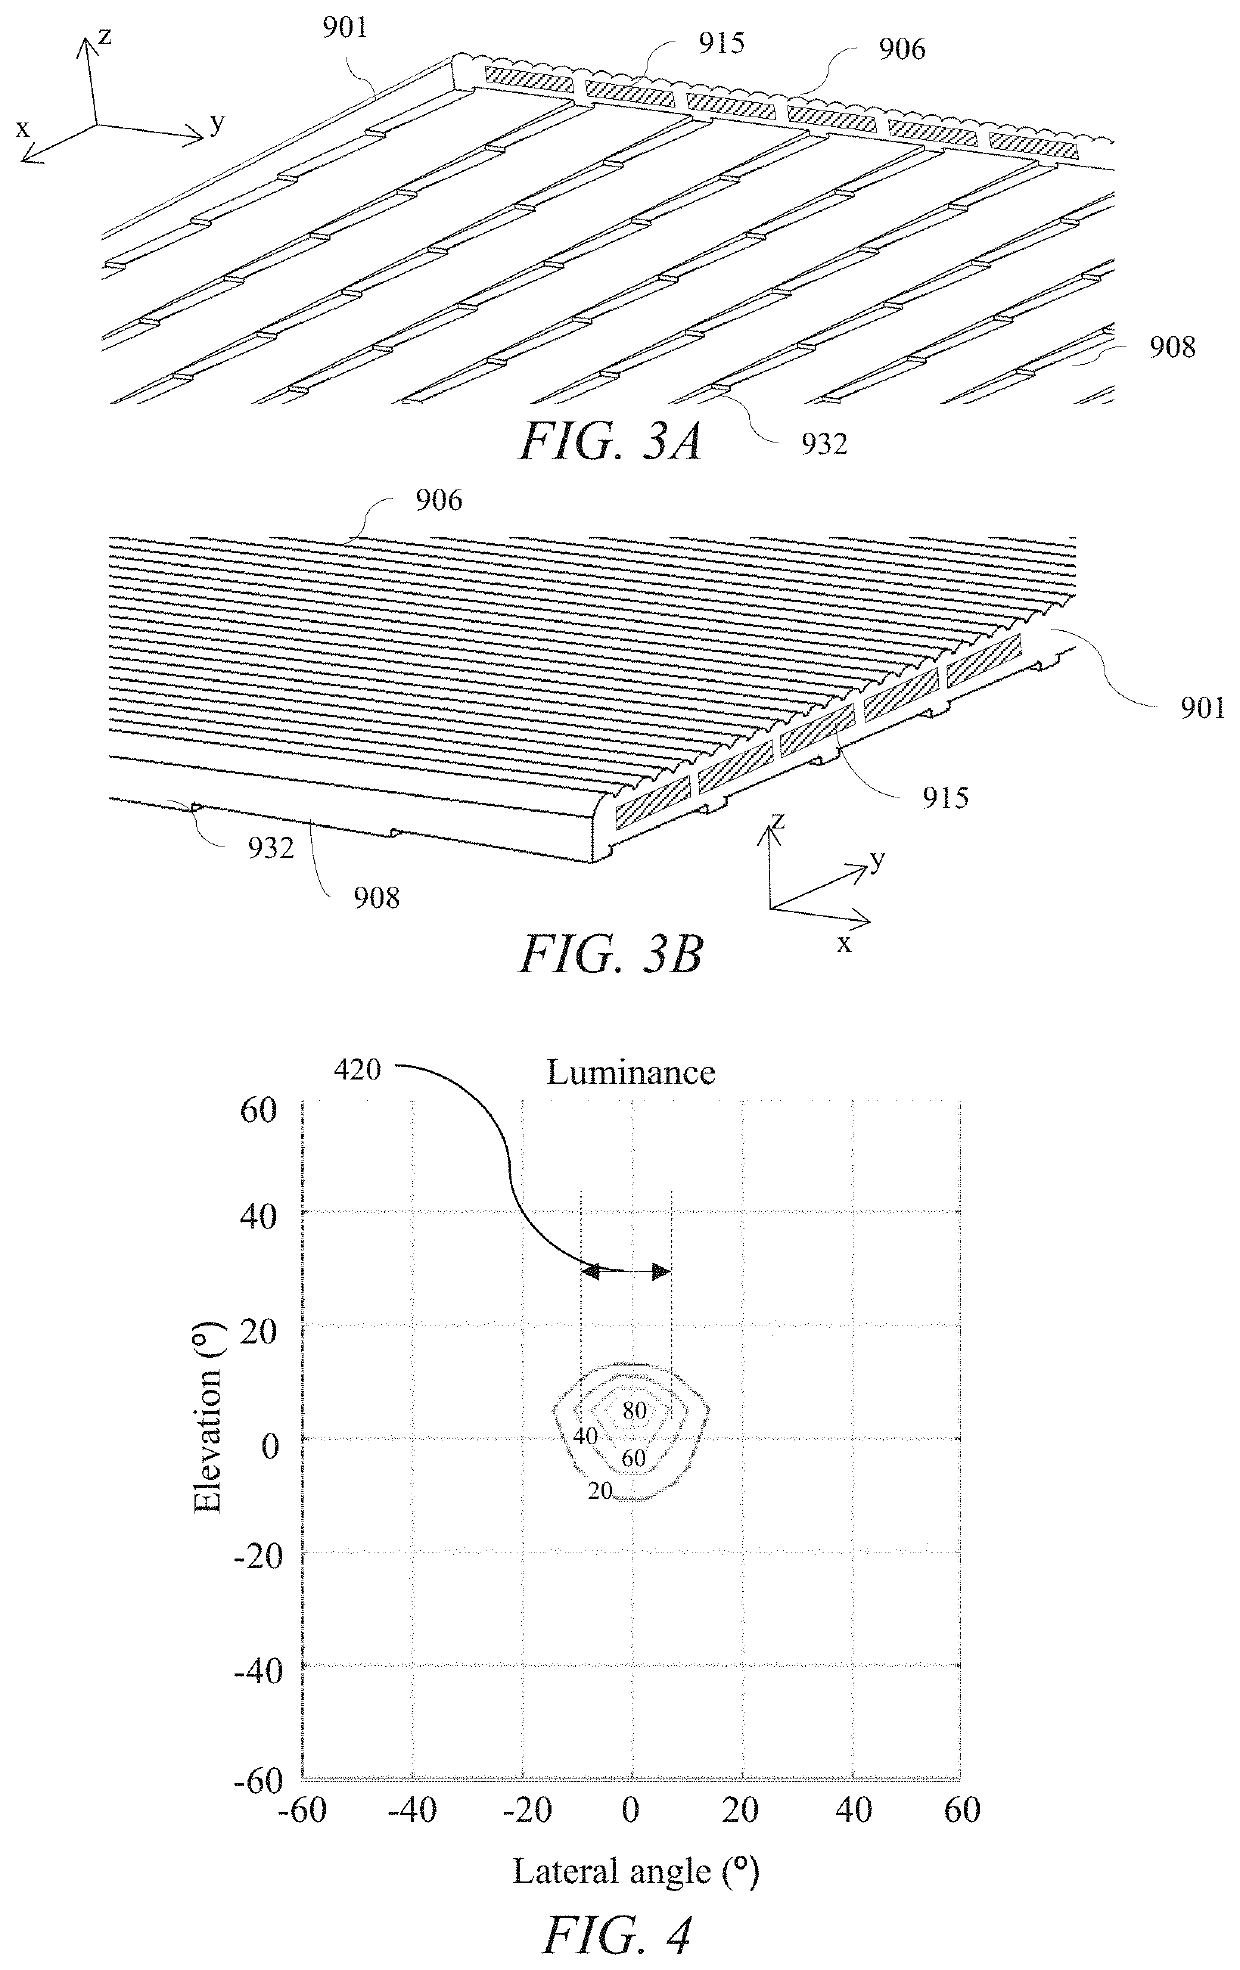 Backlights having stacked waveguide and optical components with different coefficients of friction